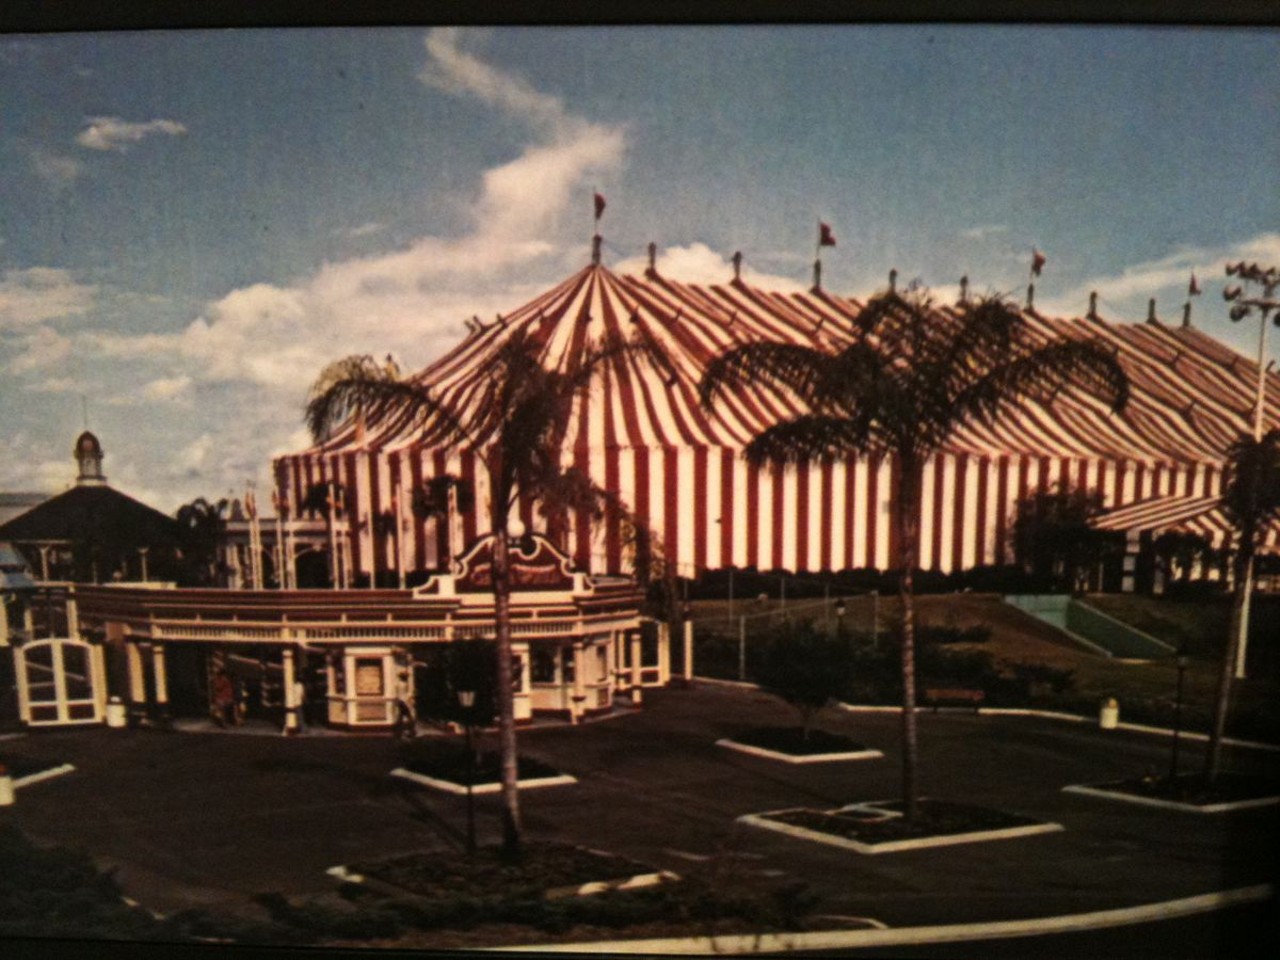 In 1974, a new theme park called Circus World Showcase opened its doors in Haines City, not far down I-4 from Walt Disney World. (photo via mouseplanet.com)